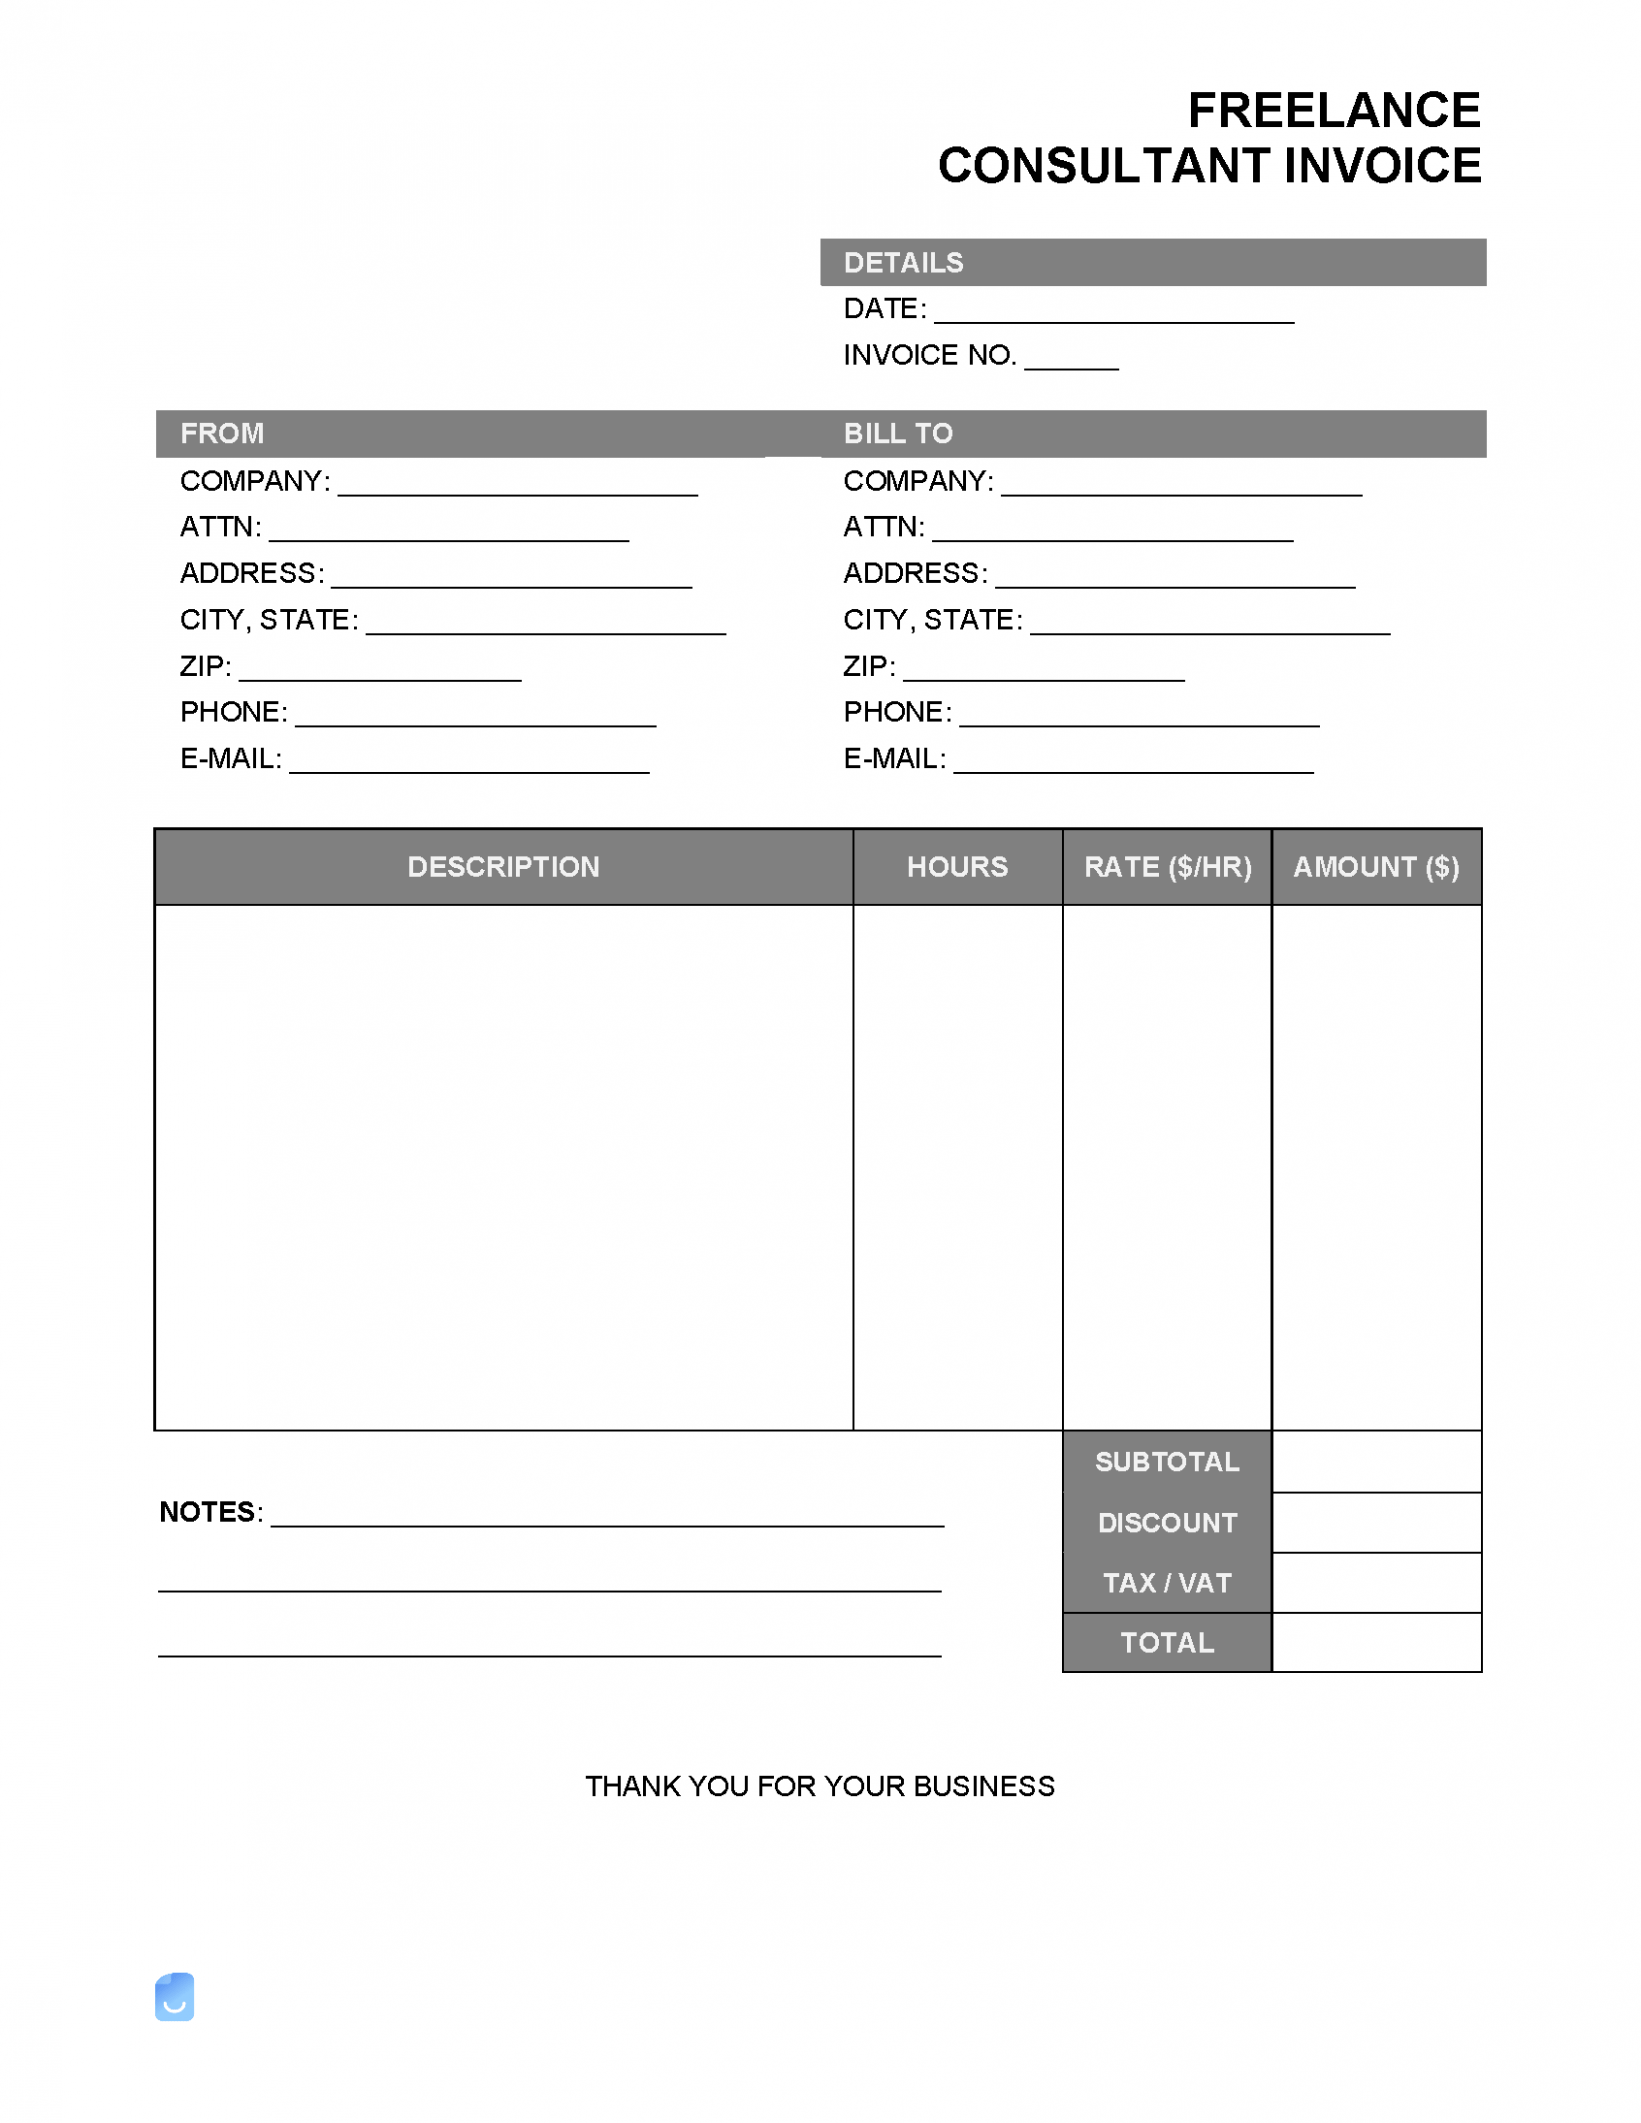 Printable Freelance Consultant Invoice Template 